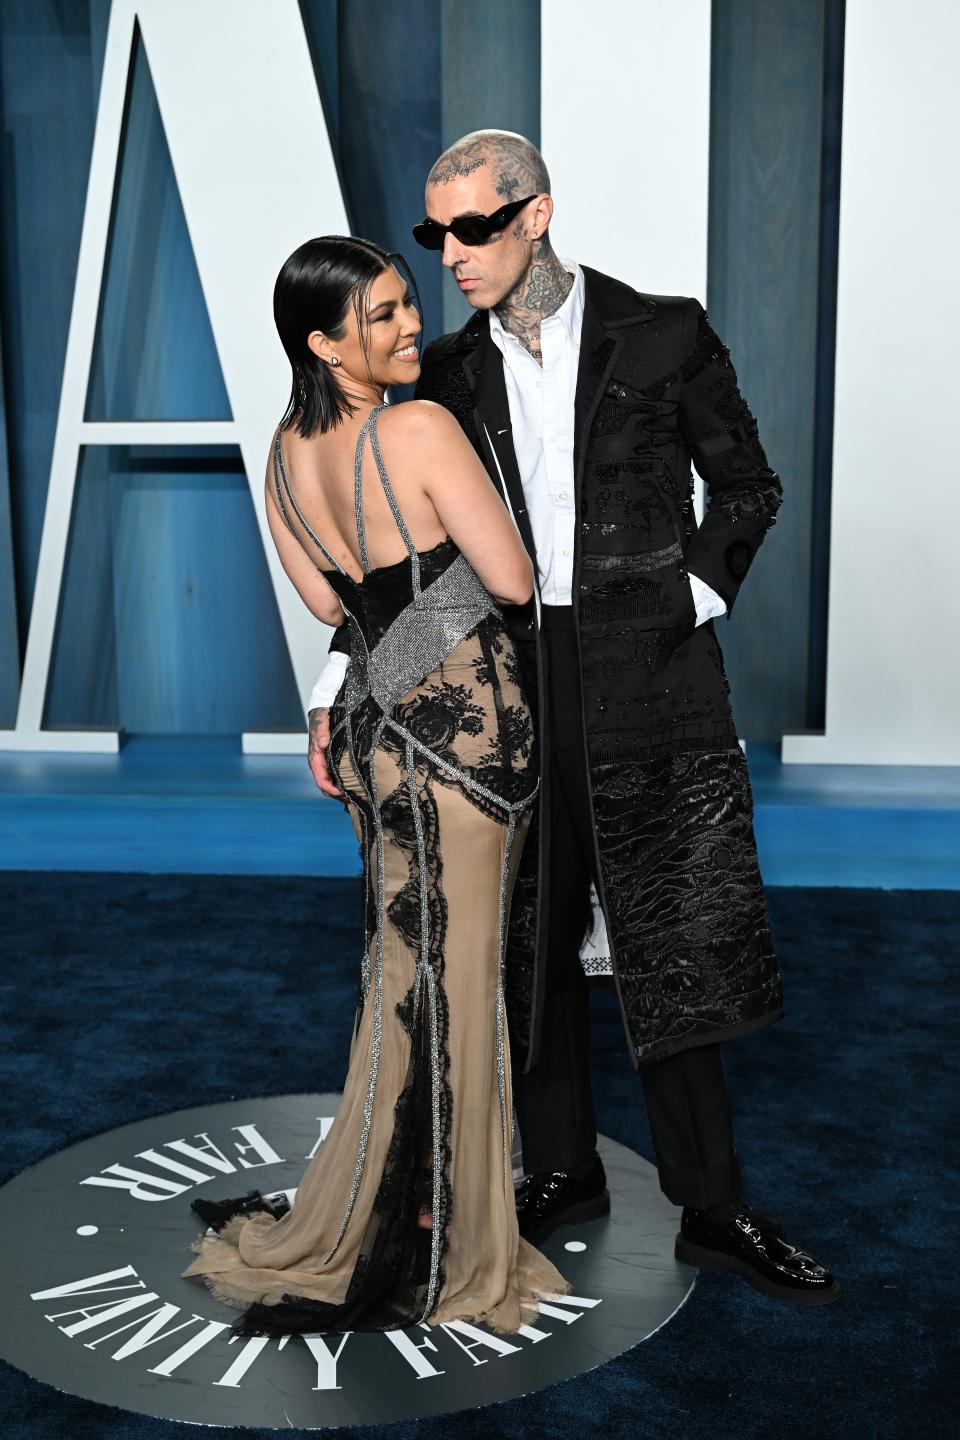 Kourtney in a beige, black, and silver gown with lace, cutouts, and straps.